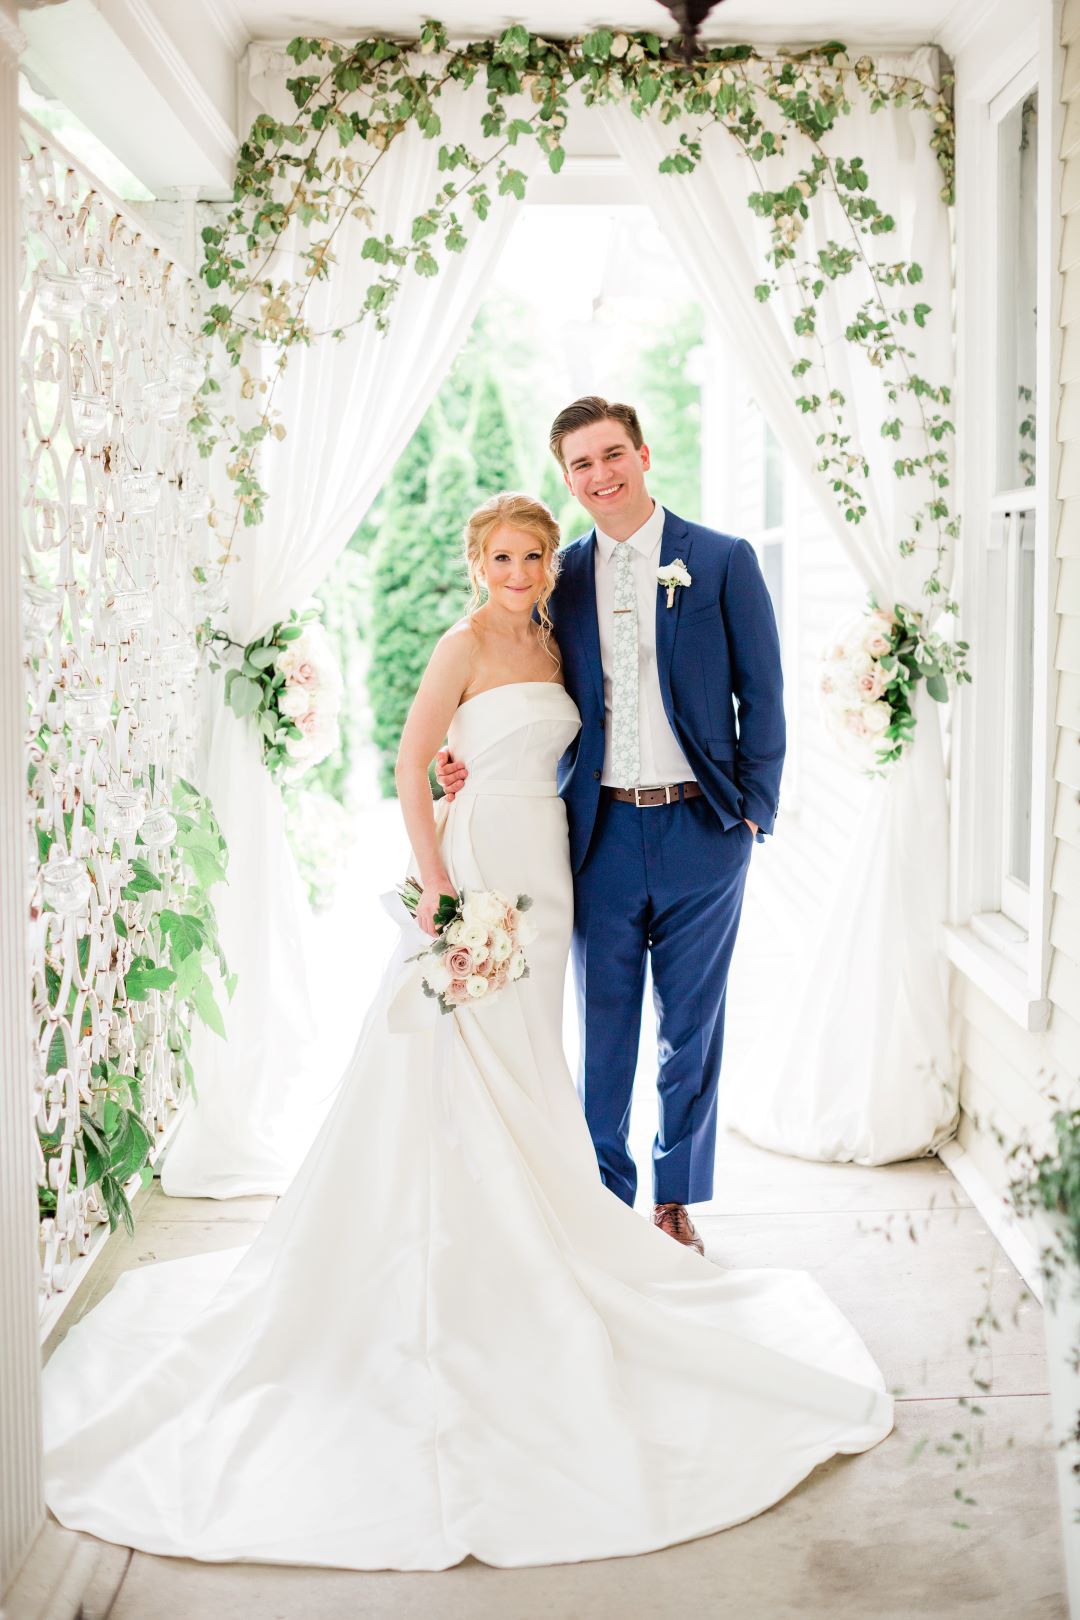 CJ's Off The Square | Bride and groom standing under an archway of greenery next to trellis